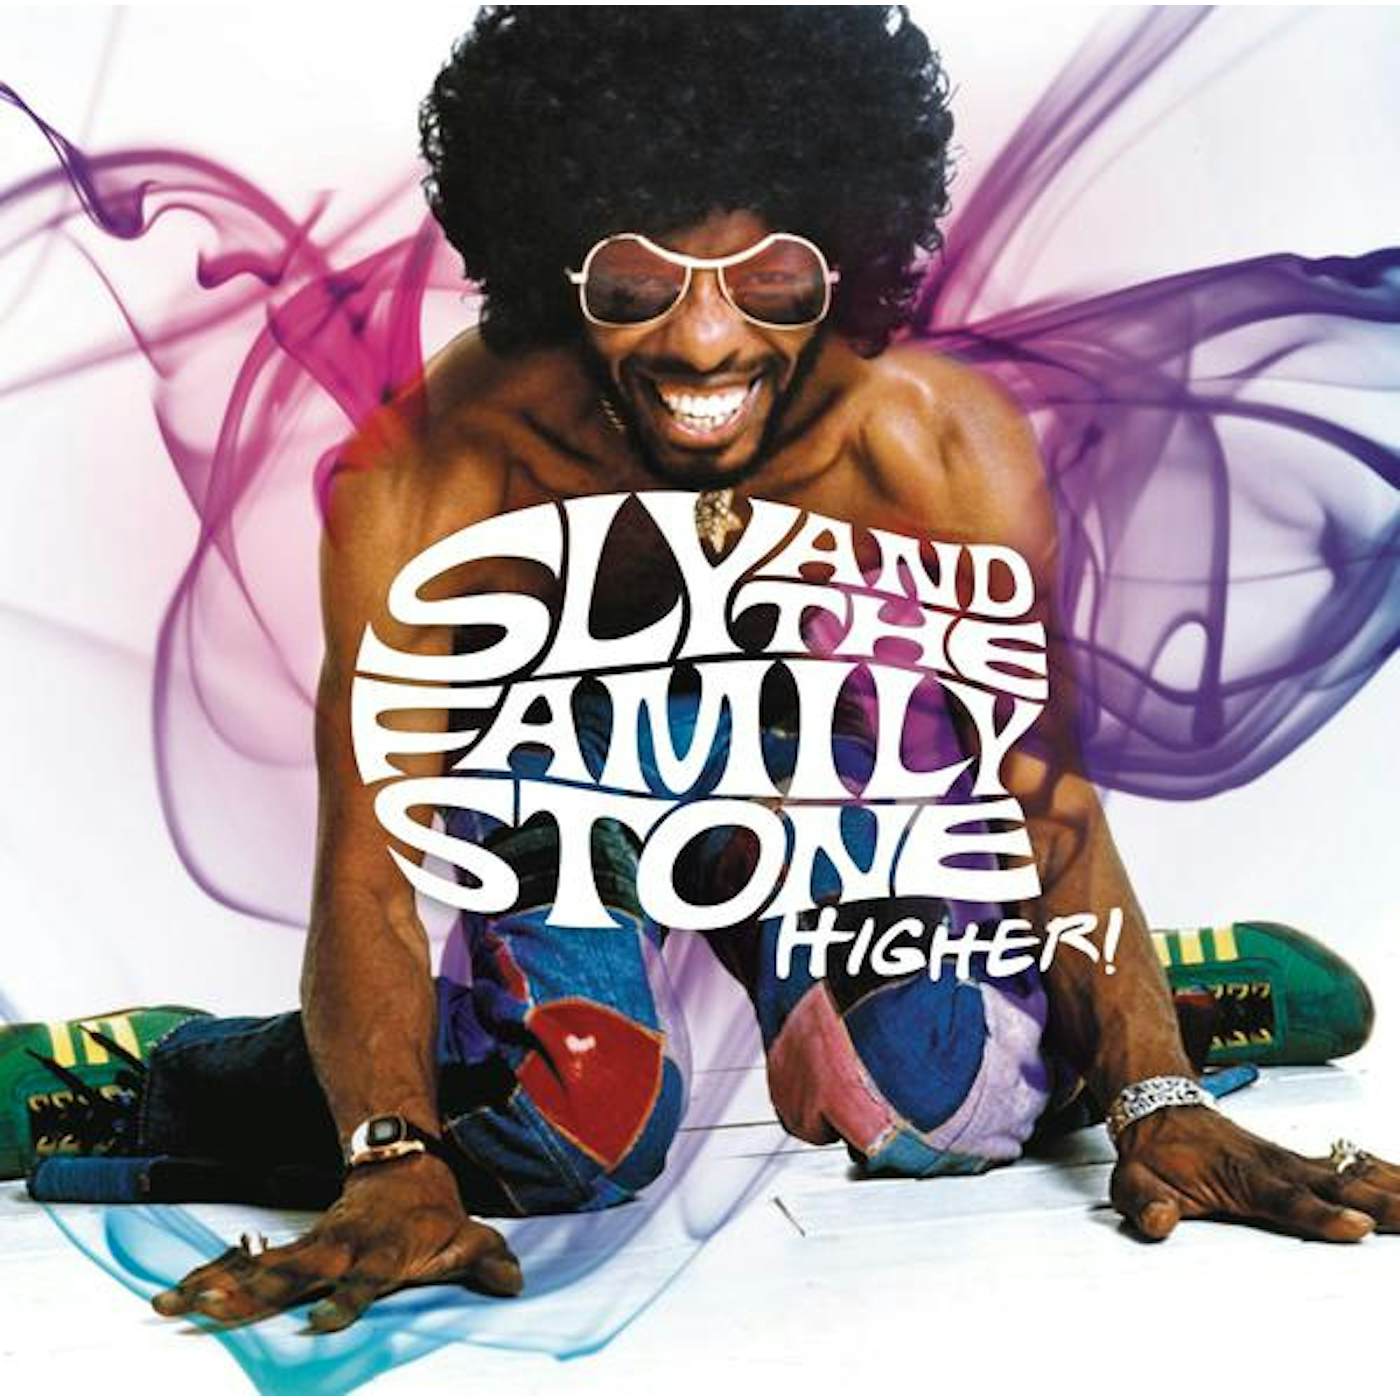 Sly & The Family Stone HIGHER (HIGHLIGHTS) CD